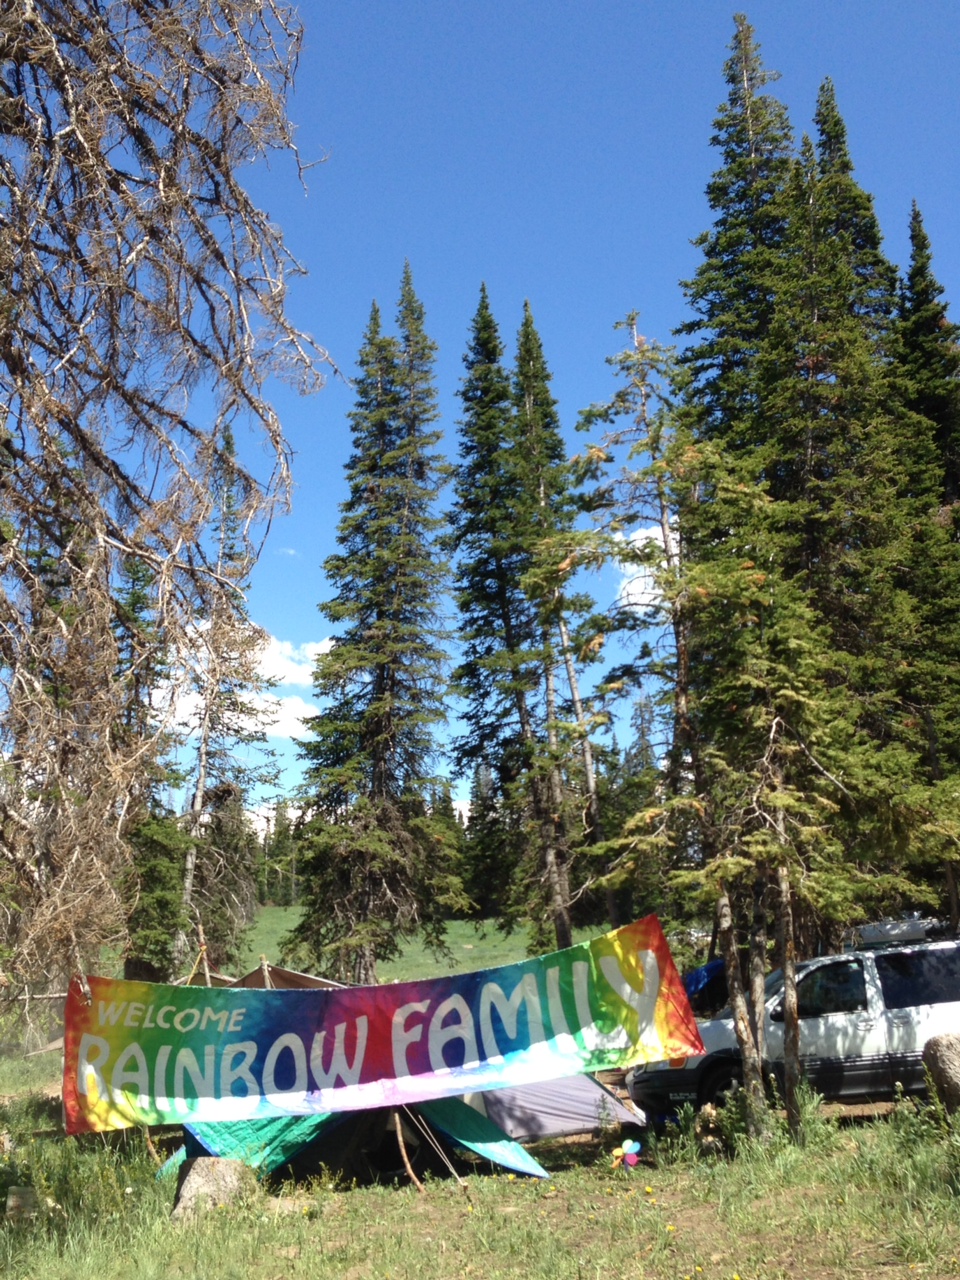 The trail entrance to the 2014 Rainbow Gathering, east of Heber City, Utah.